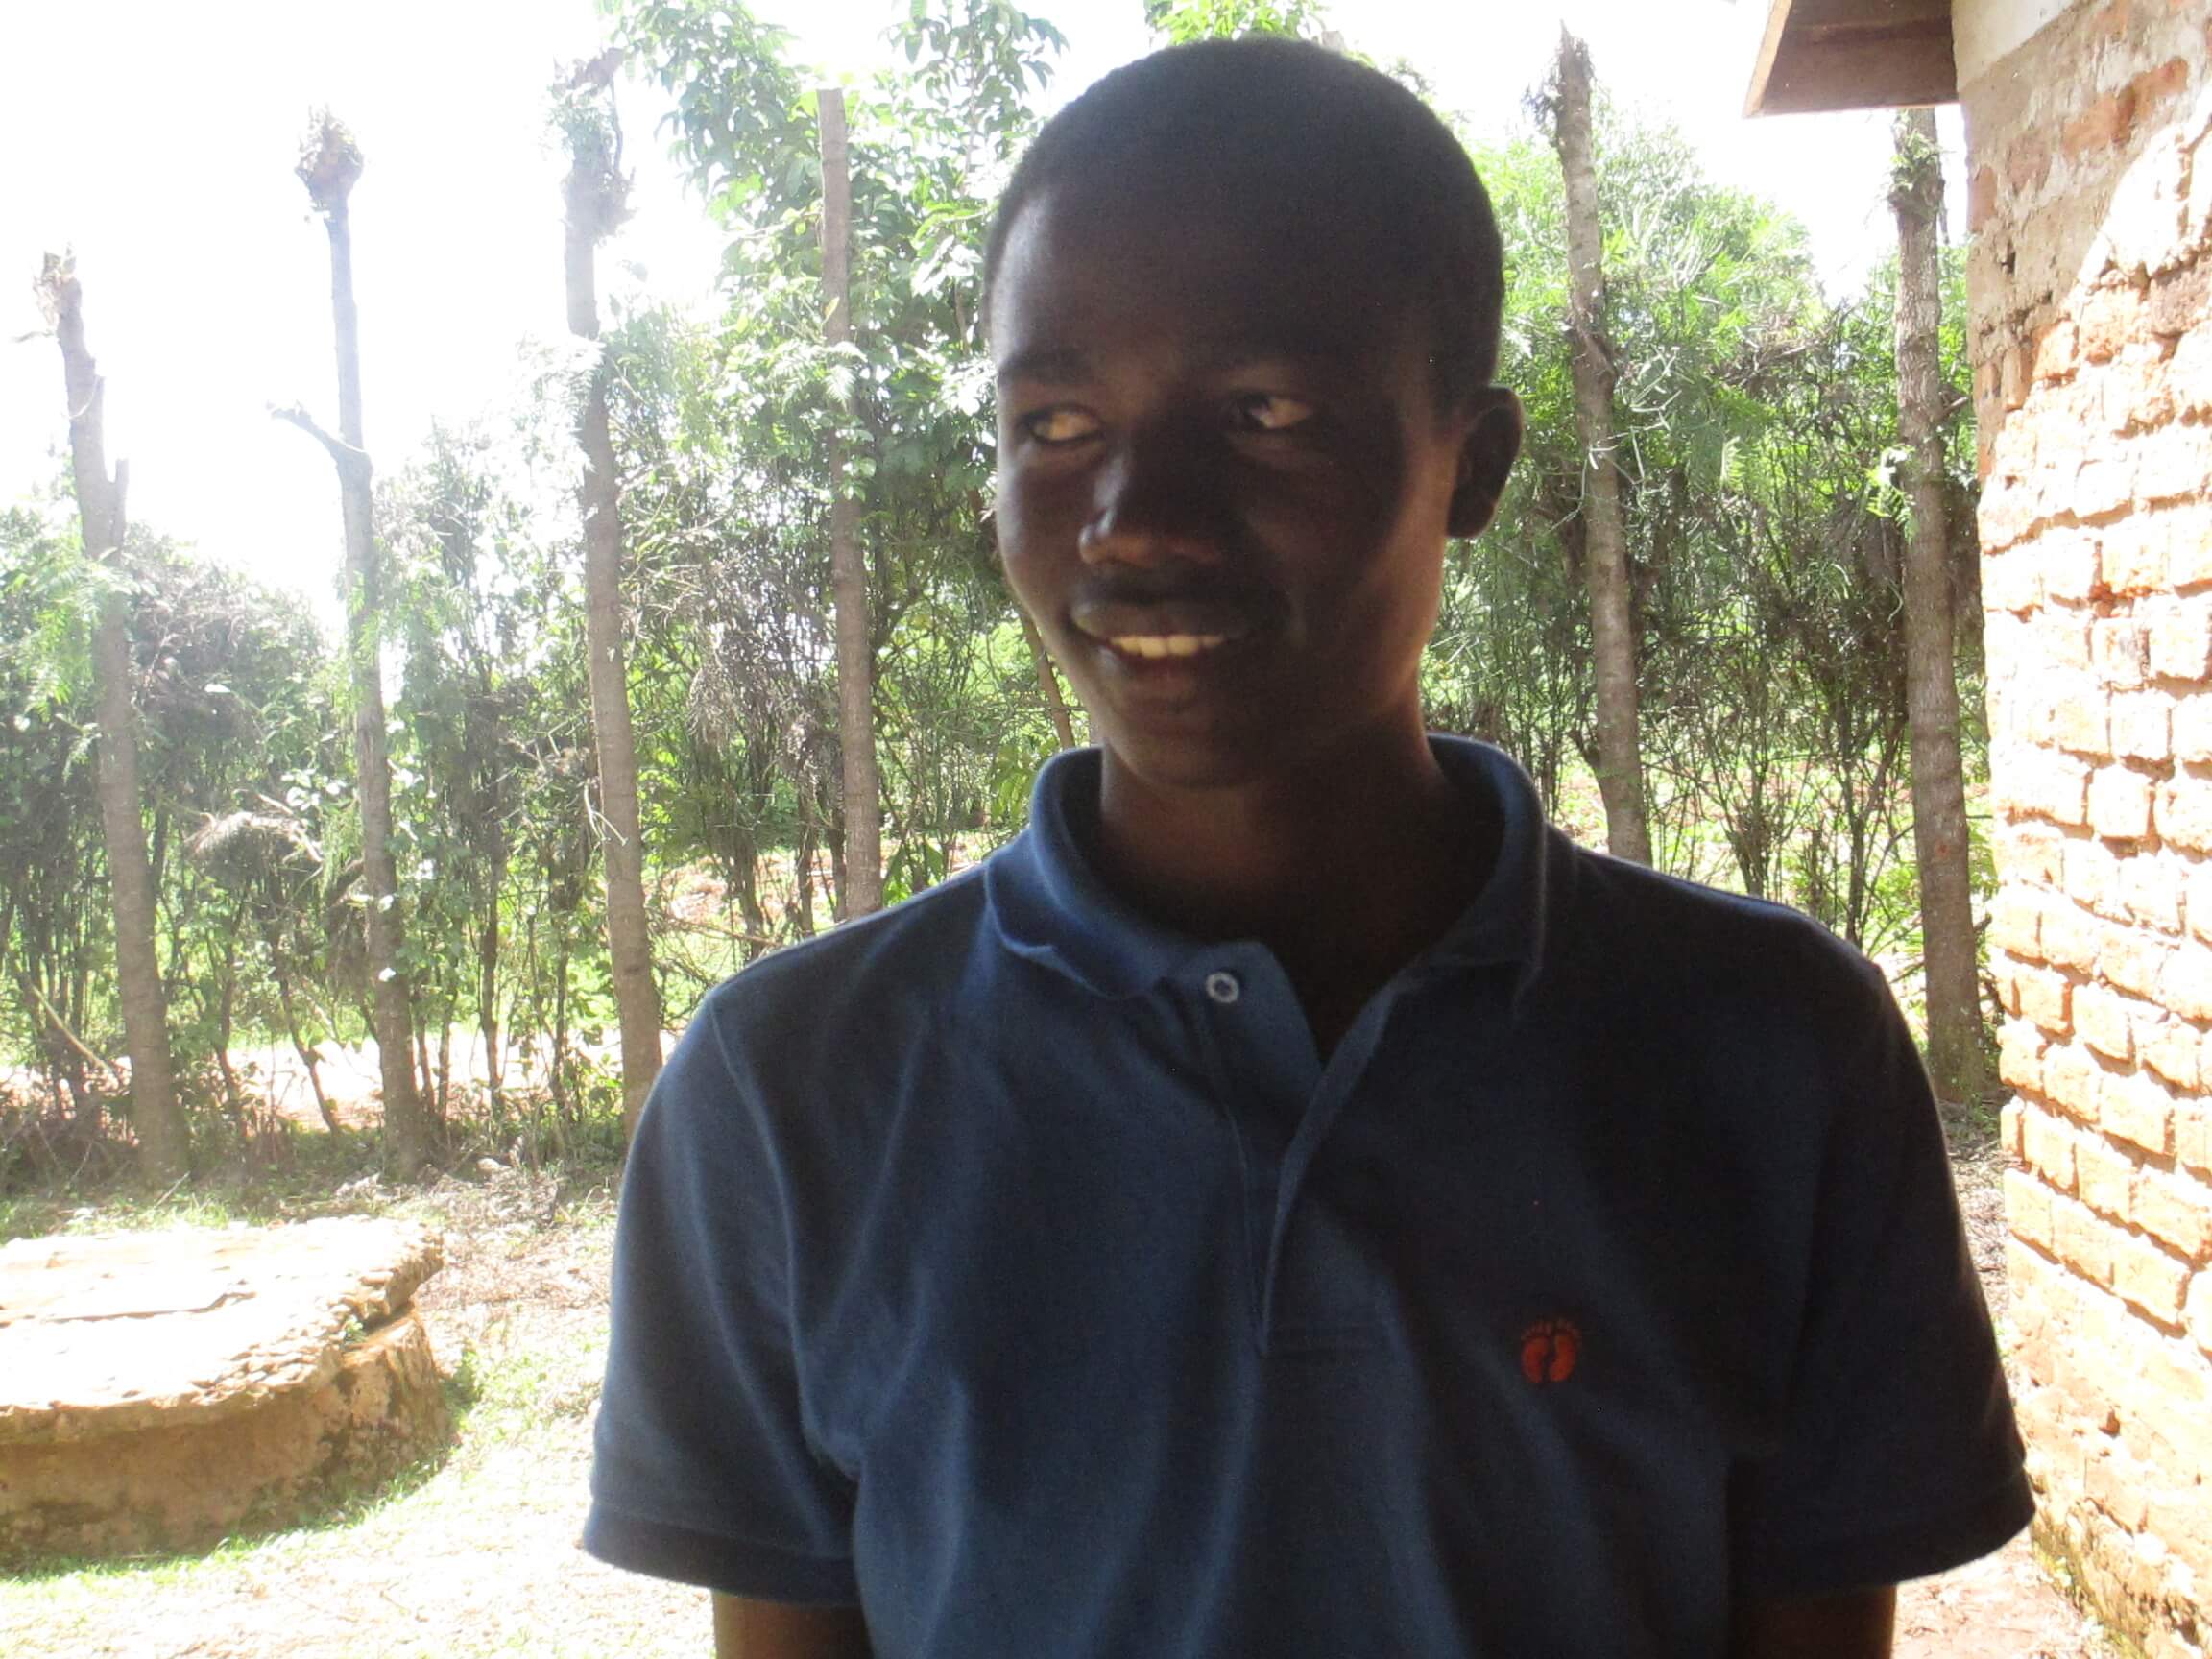 Martin - one of the students who sent a handwritten letter